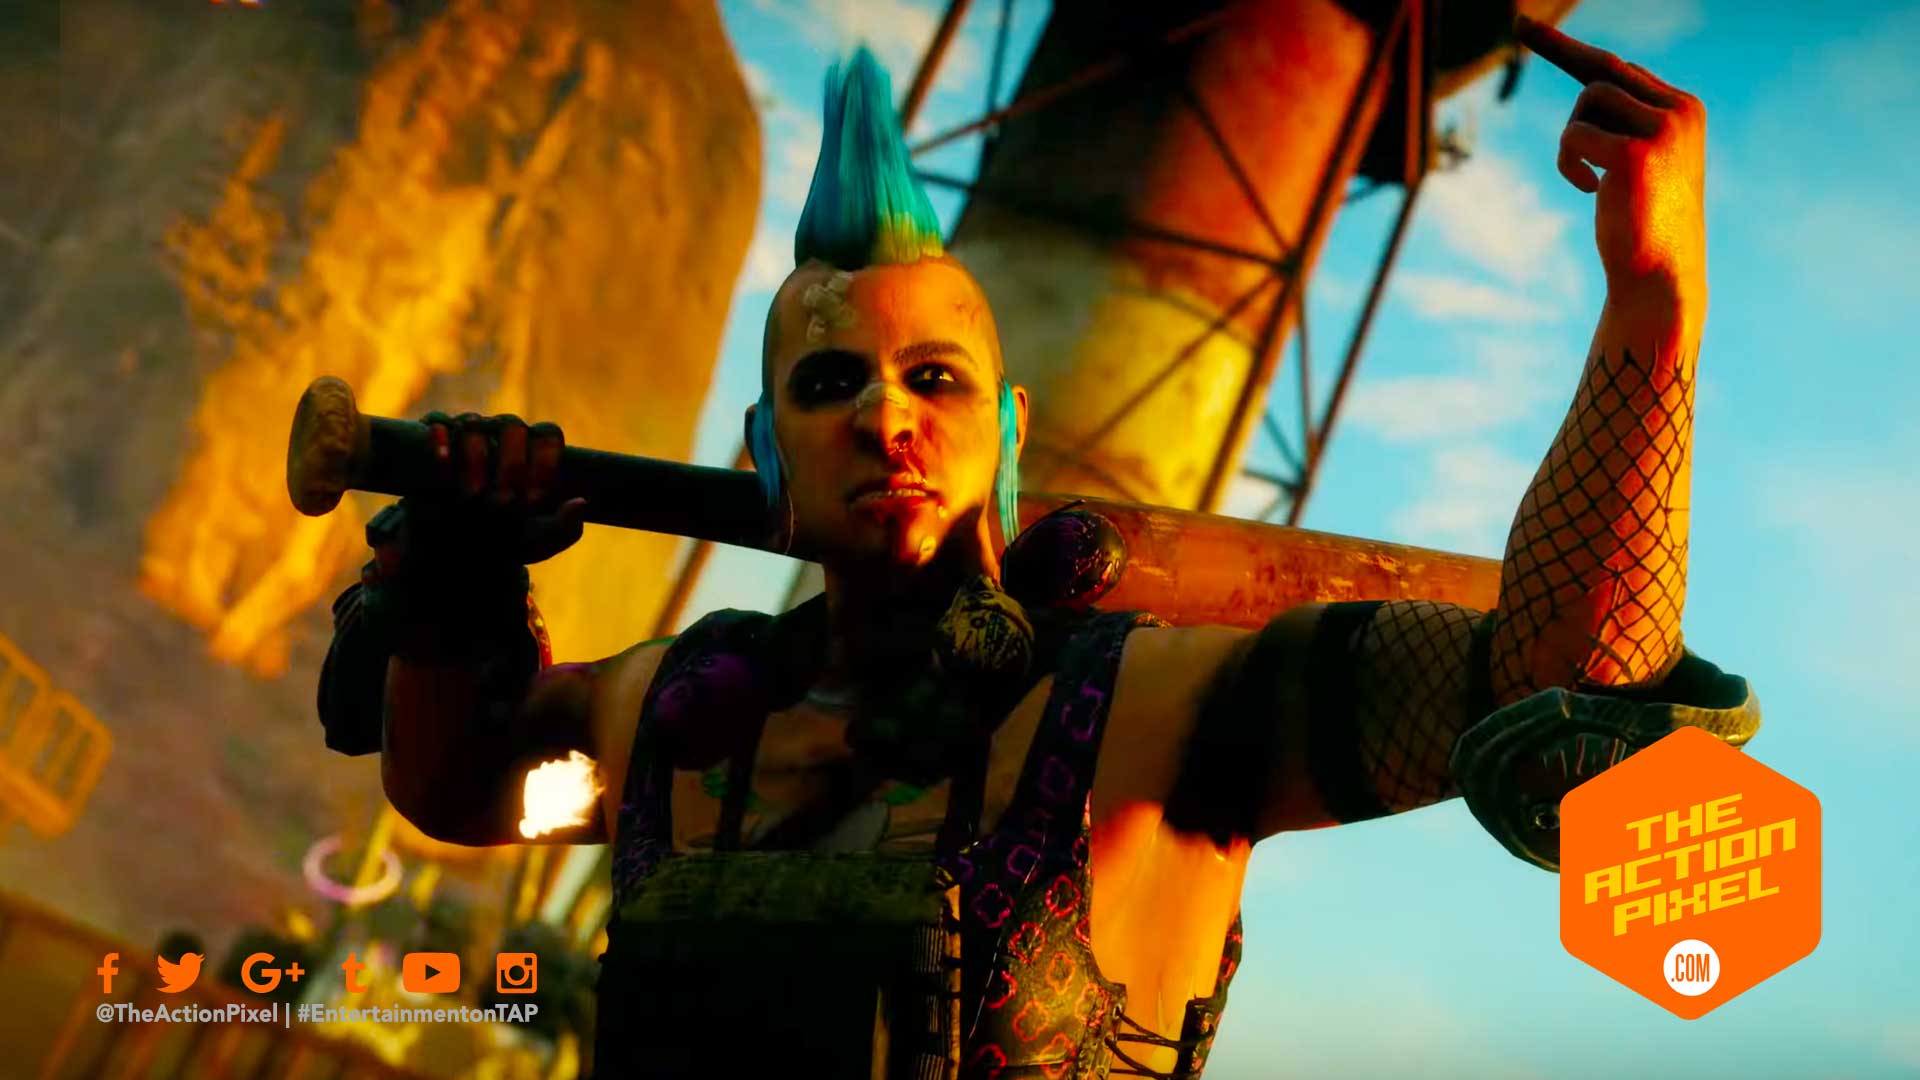 rage 2, rage 2 co op, rage 2 trophies, the action pixel, rage 2 launch trailer, bethesda,bethesda softworks, id software, general cross, the action pixel, entertainment on tap,